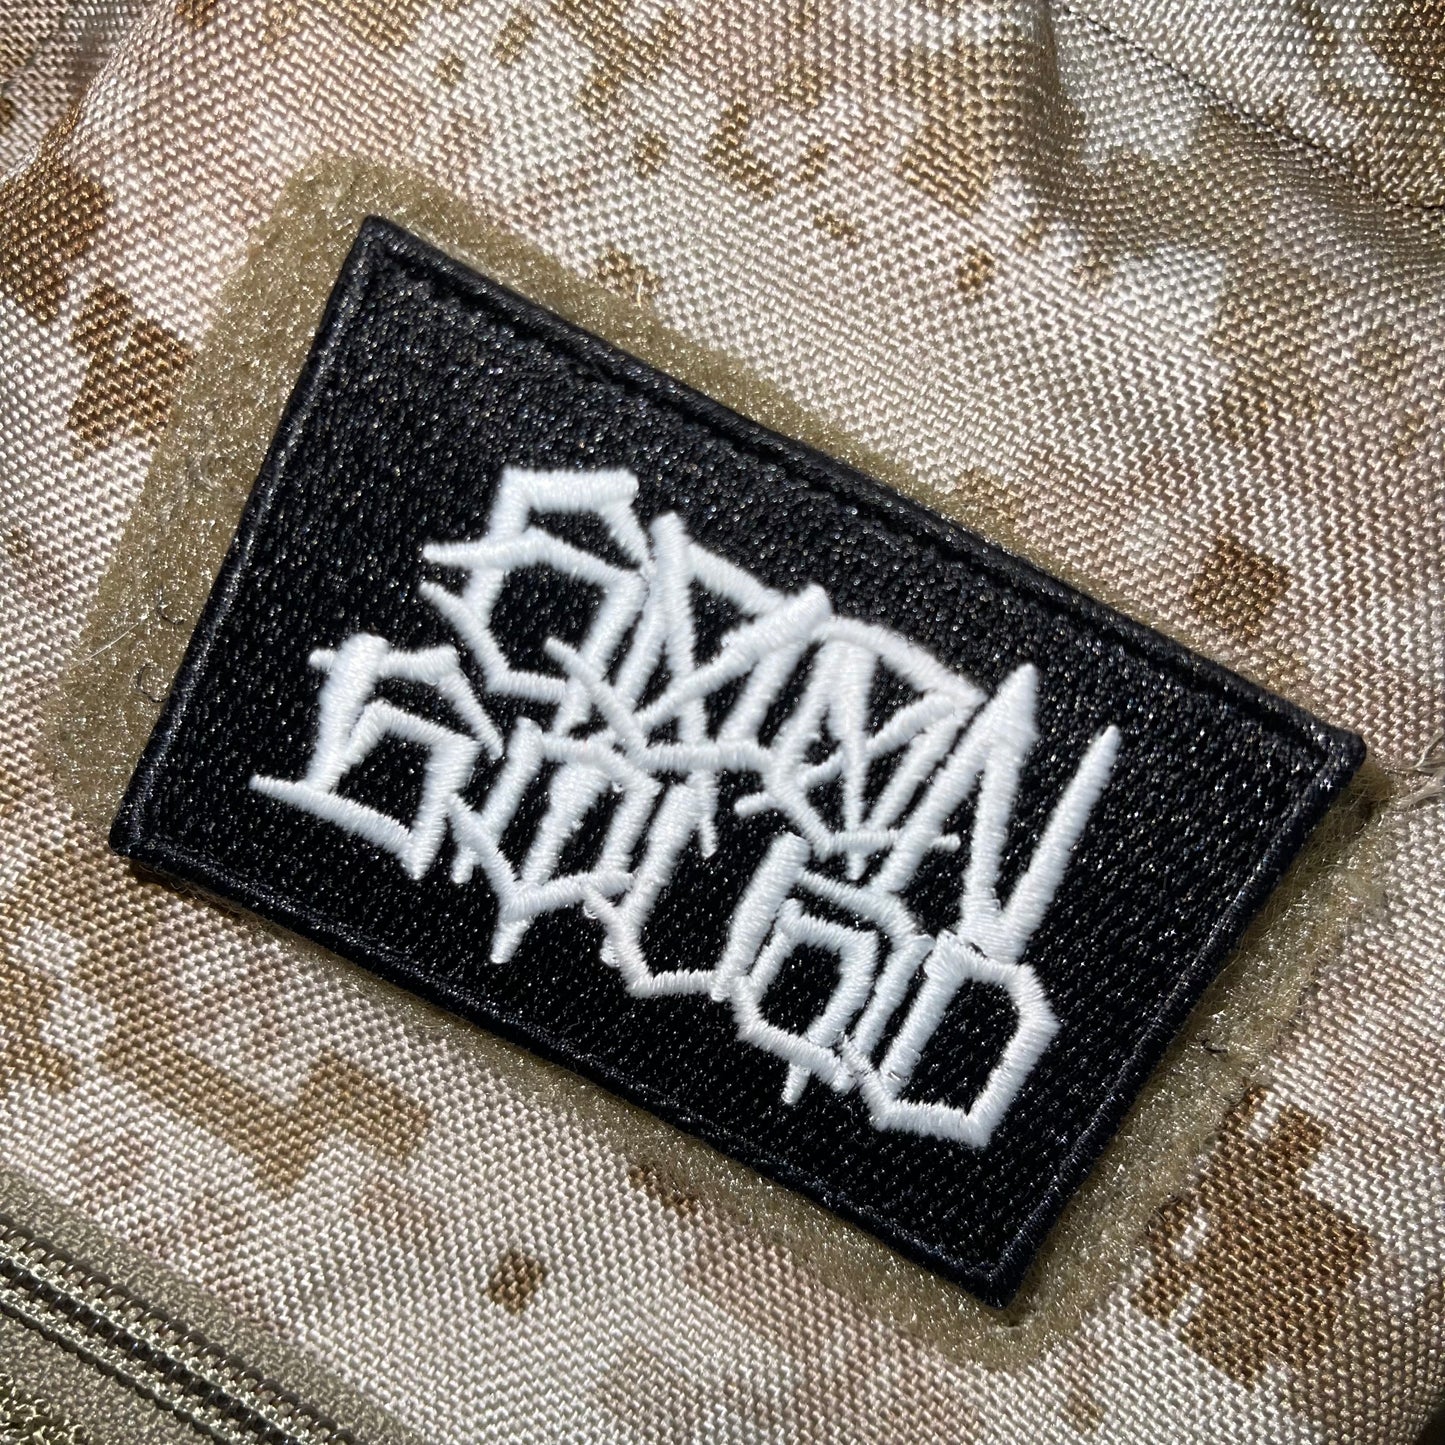 Goon squad Embroidered Patch Blk/Wht Gitd